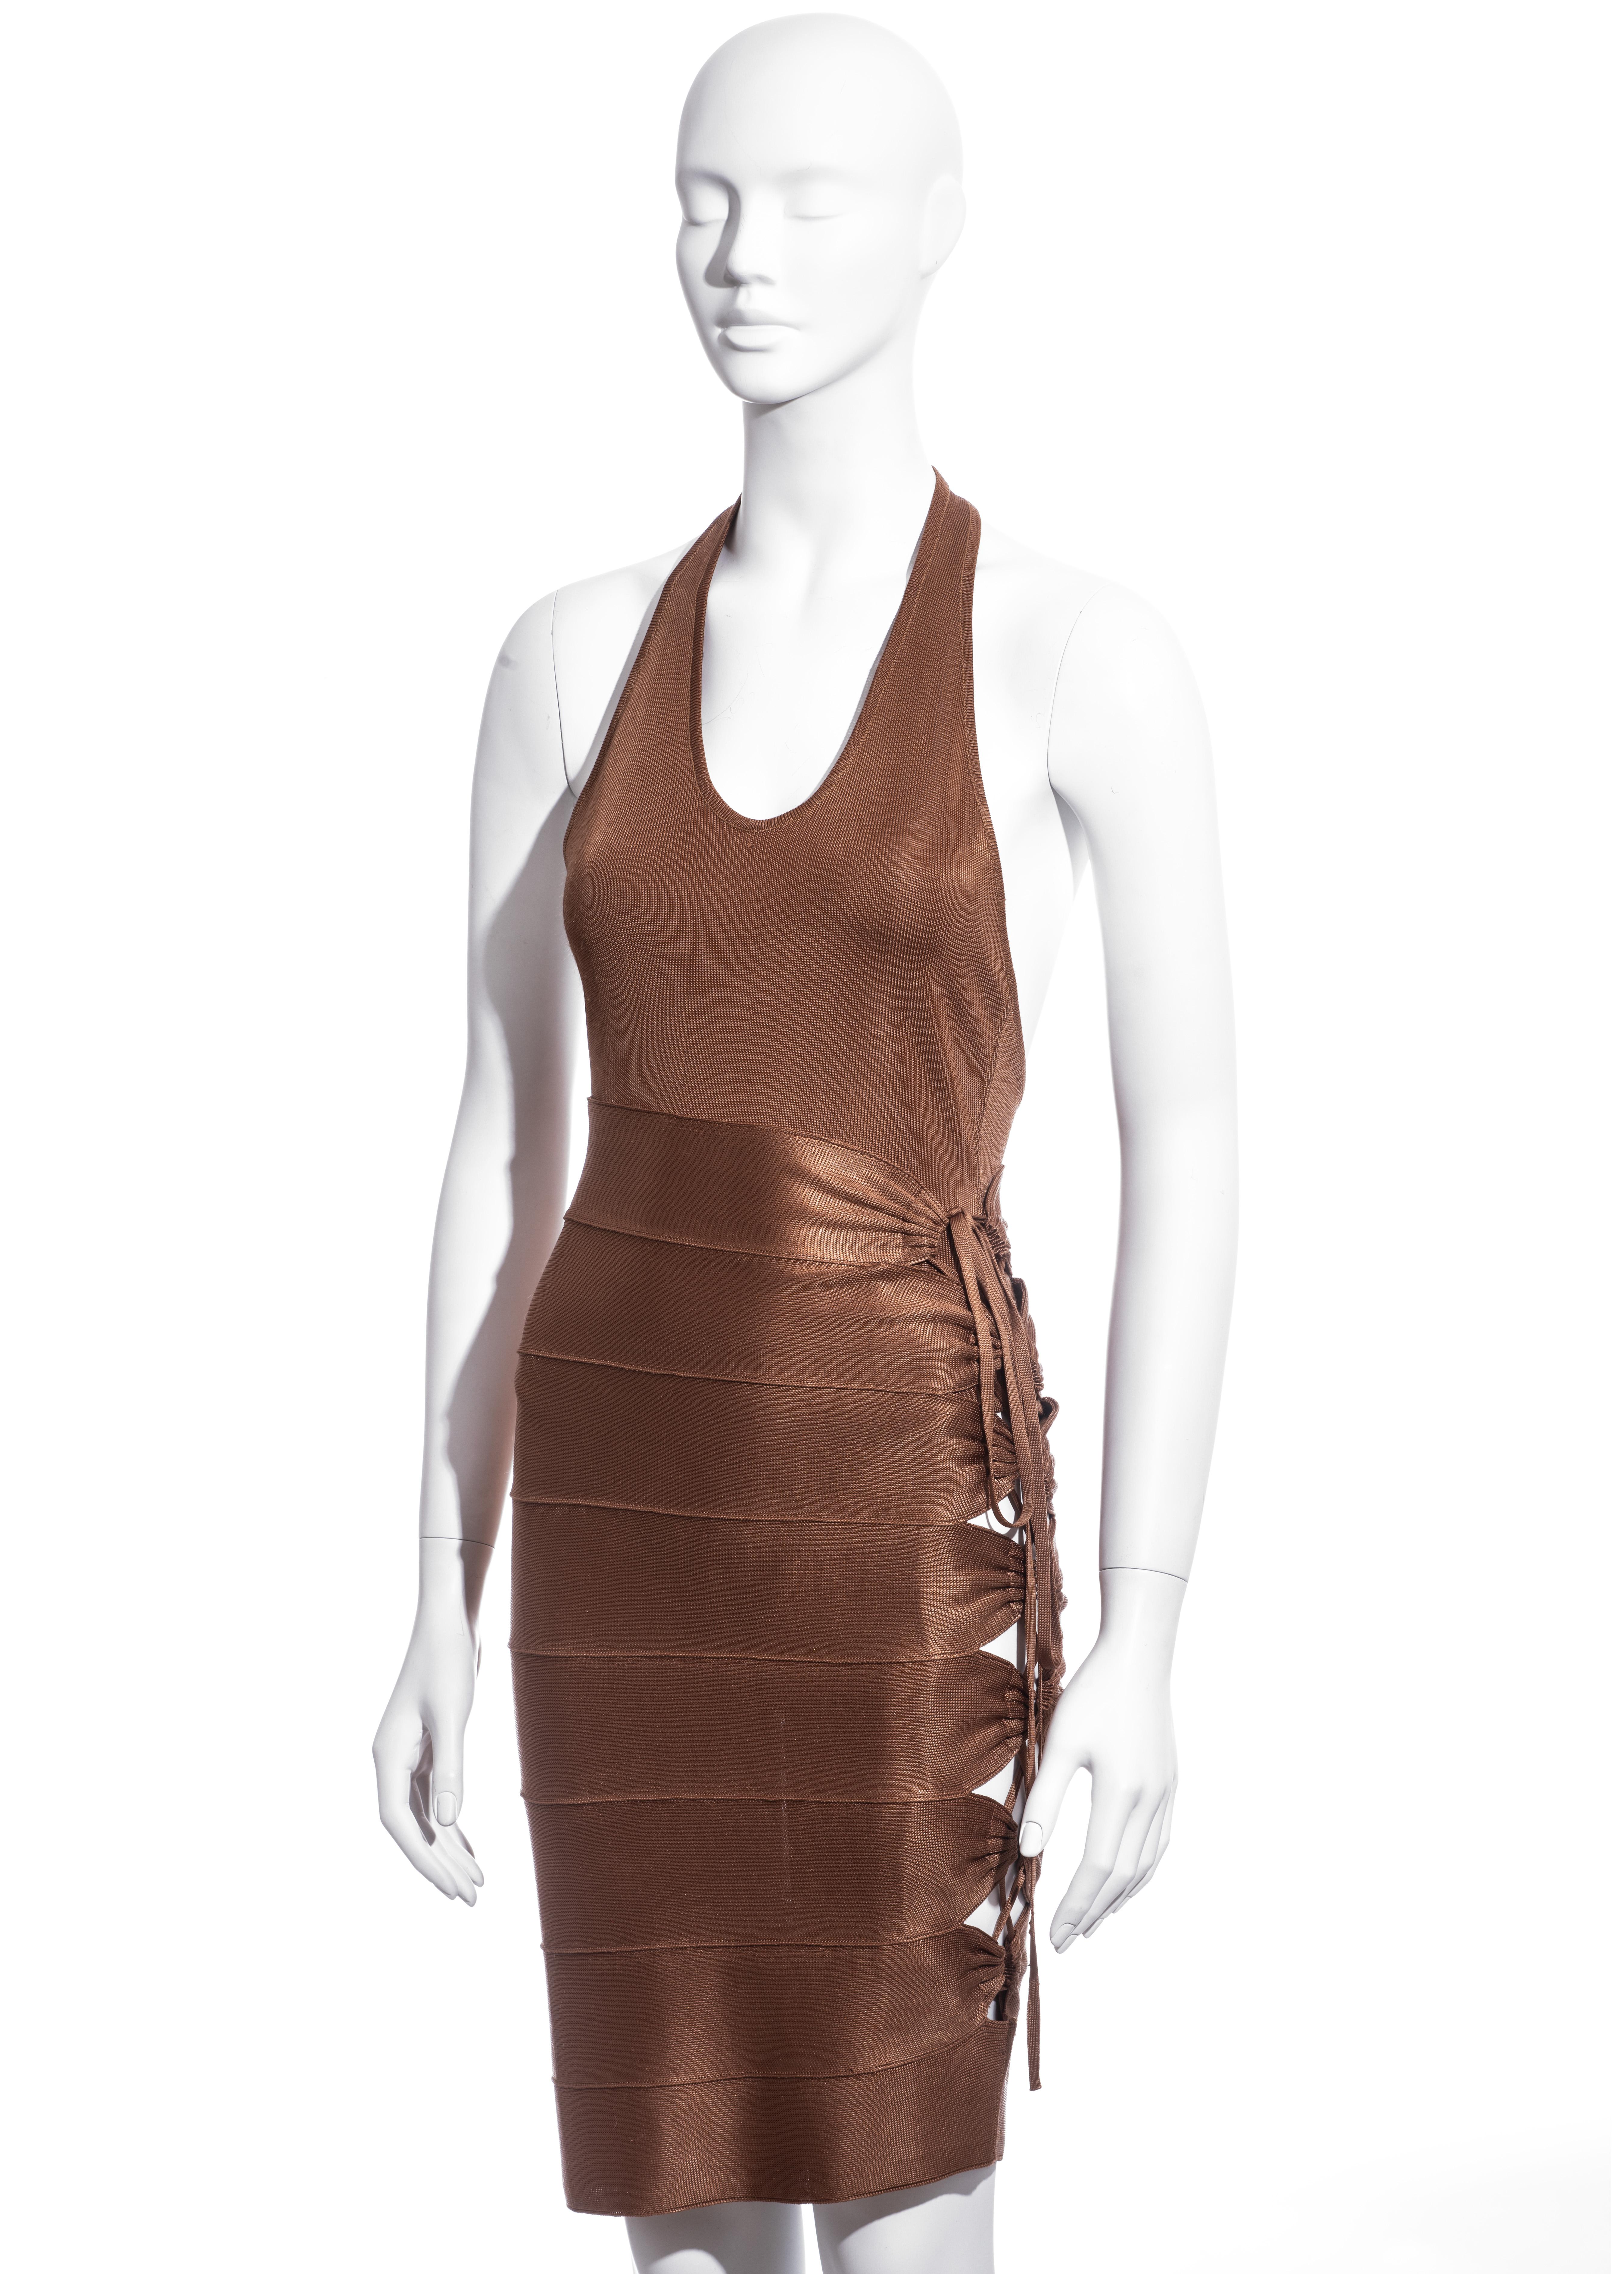 ▪ Azzedine Alaia copper bandage skirt and bodysuit 
▪ 100% Acetate  
▪ Eight connecting panels  
▪ Skin bearing lace-up string fastening  
▪ Halterneck bodysuit
▪ Size Small 
▪ Spring-Summer 1986